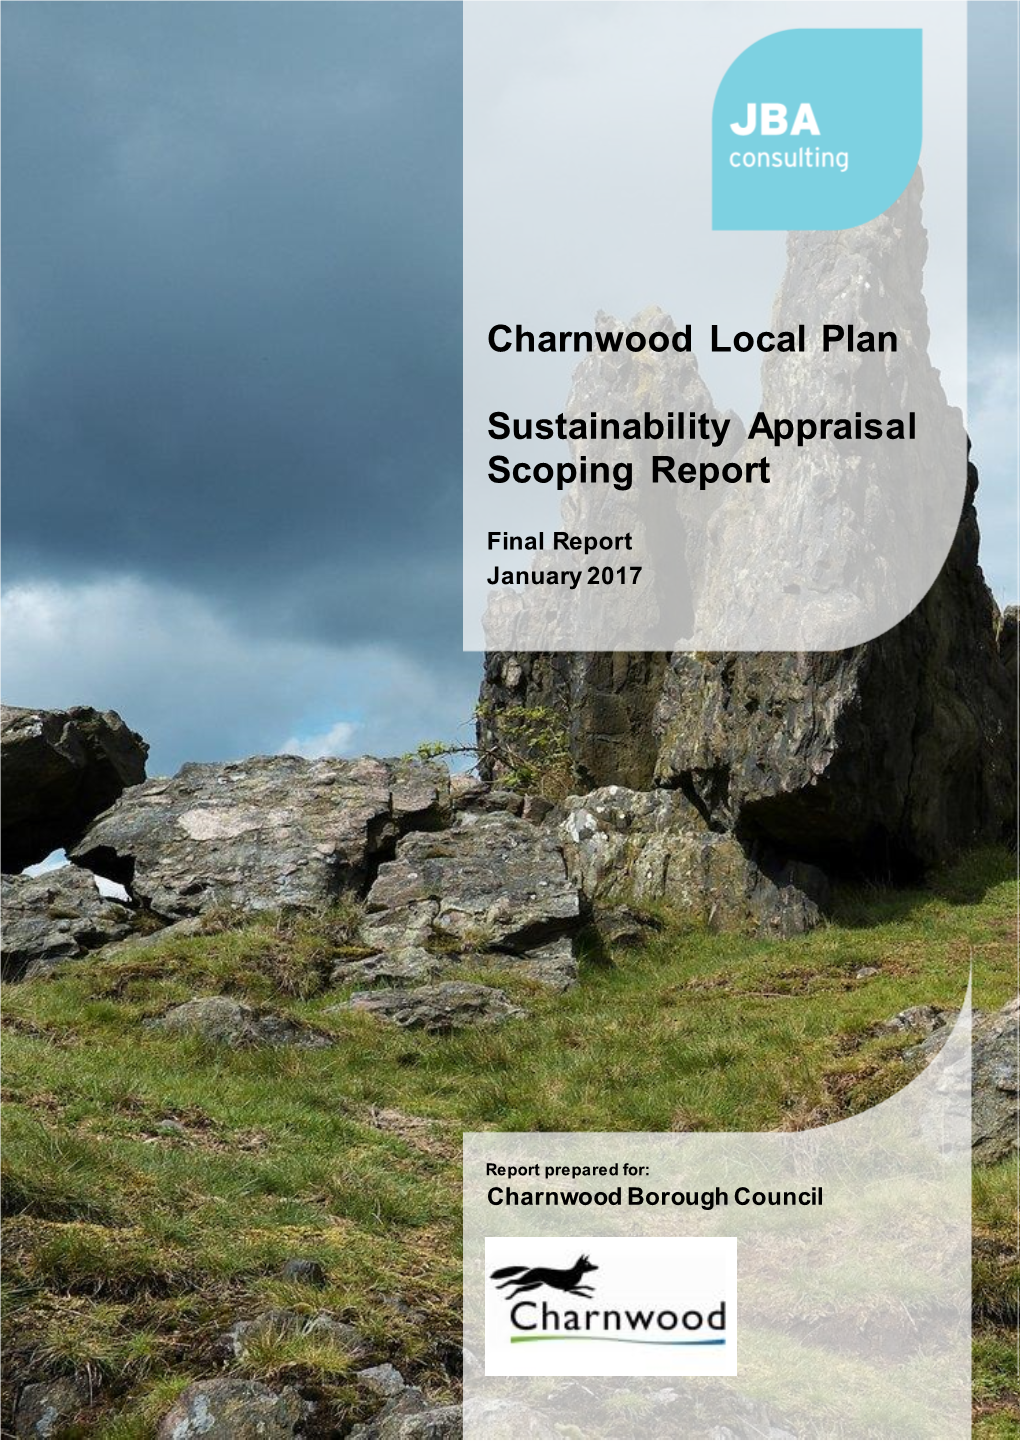 Sustainability Appraisal Scoping Report (Charnwood Local Plan)